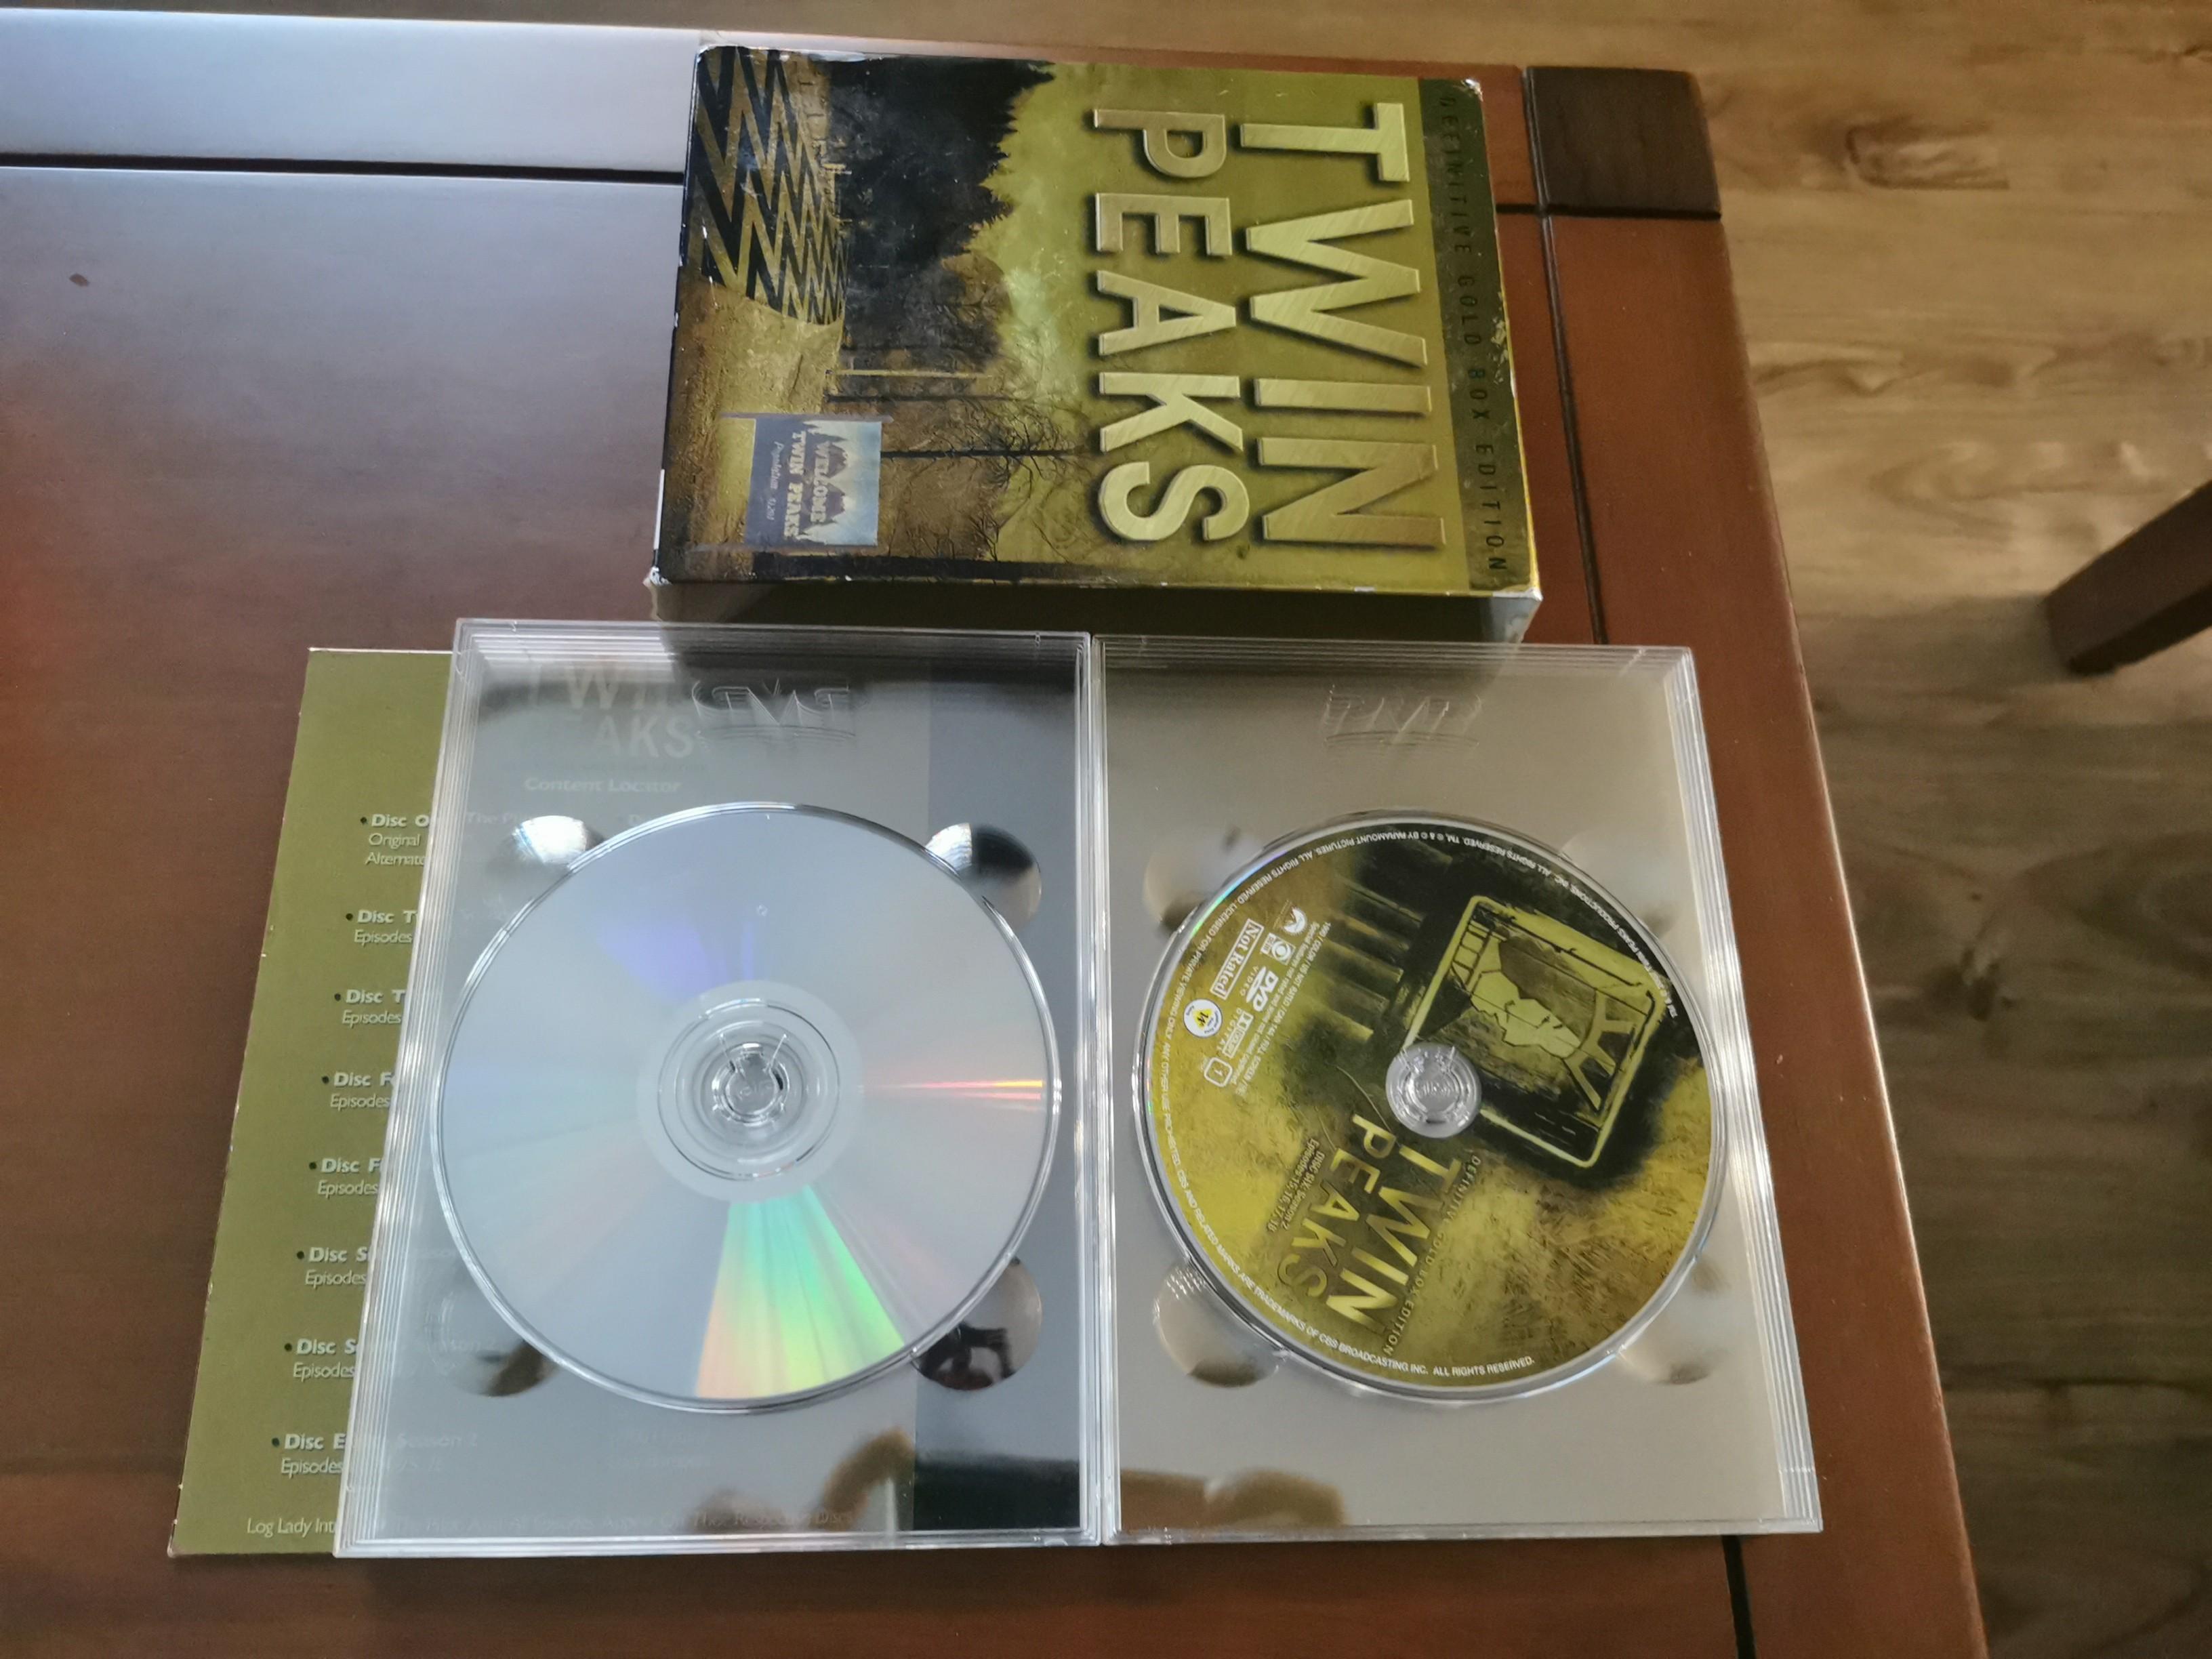 Twin Peaks - Definitive Gold Boxed Edition DVD